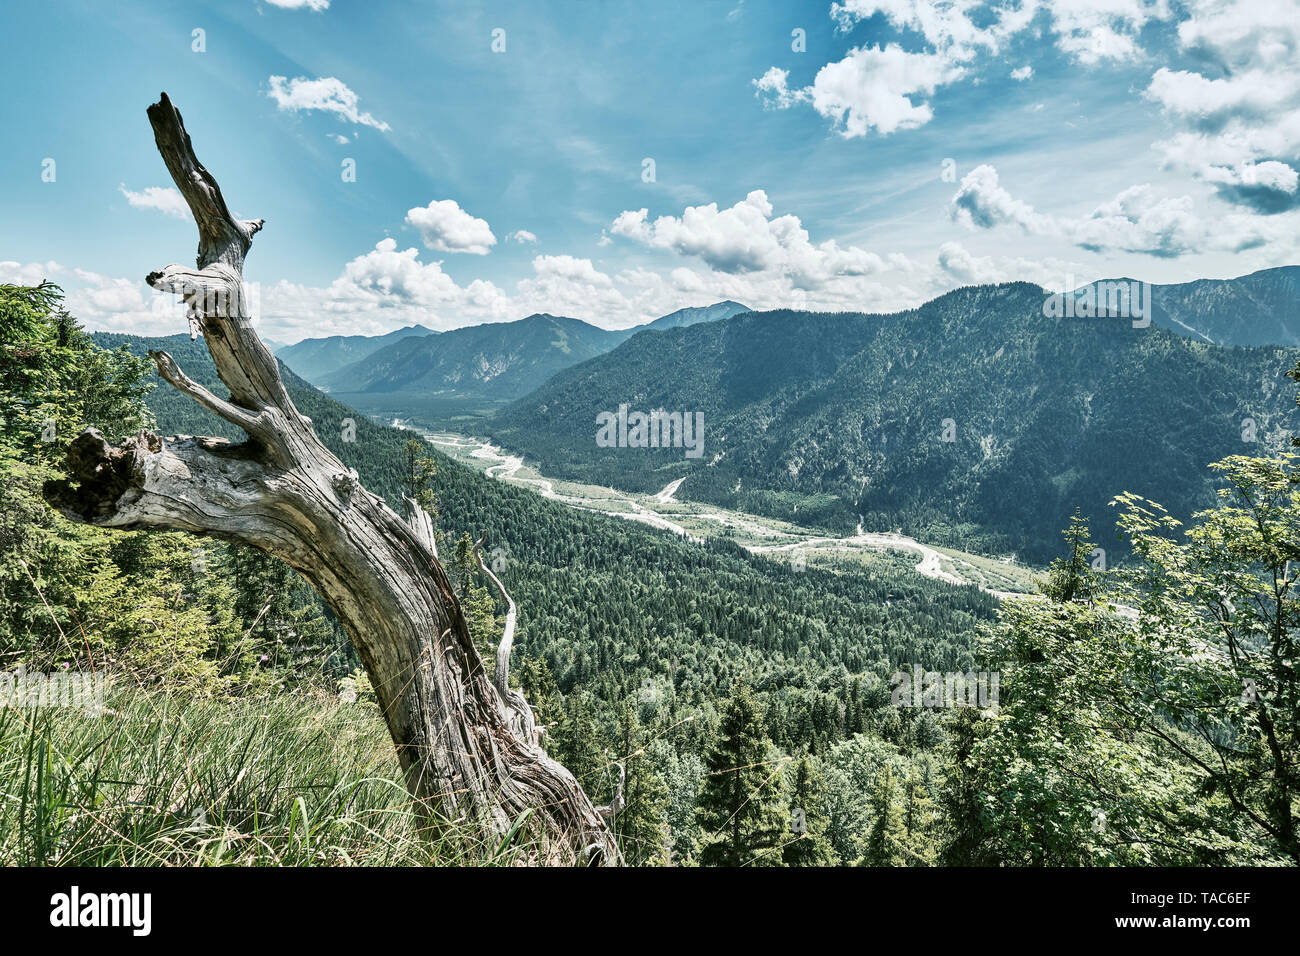 Germany, Bavaria, view above the Isar Valley between Wallgau and Vorderriss with  Karwendel Mountains in background Stock Photo